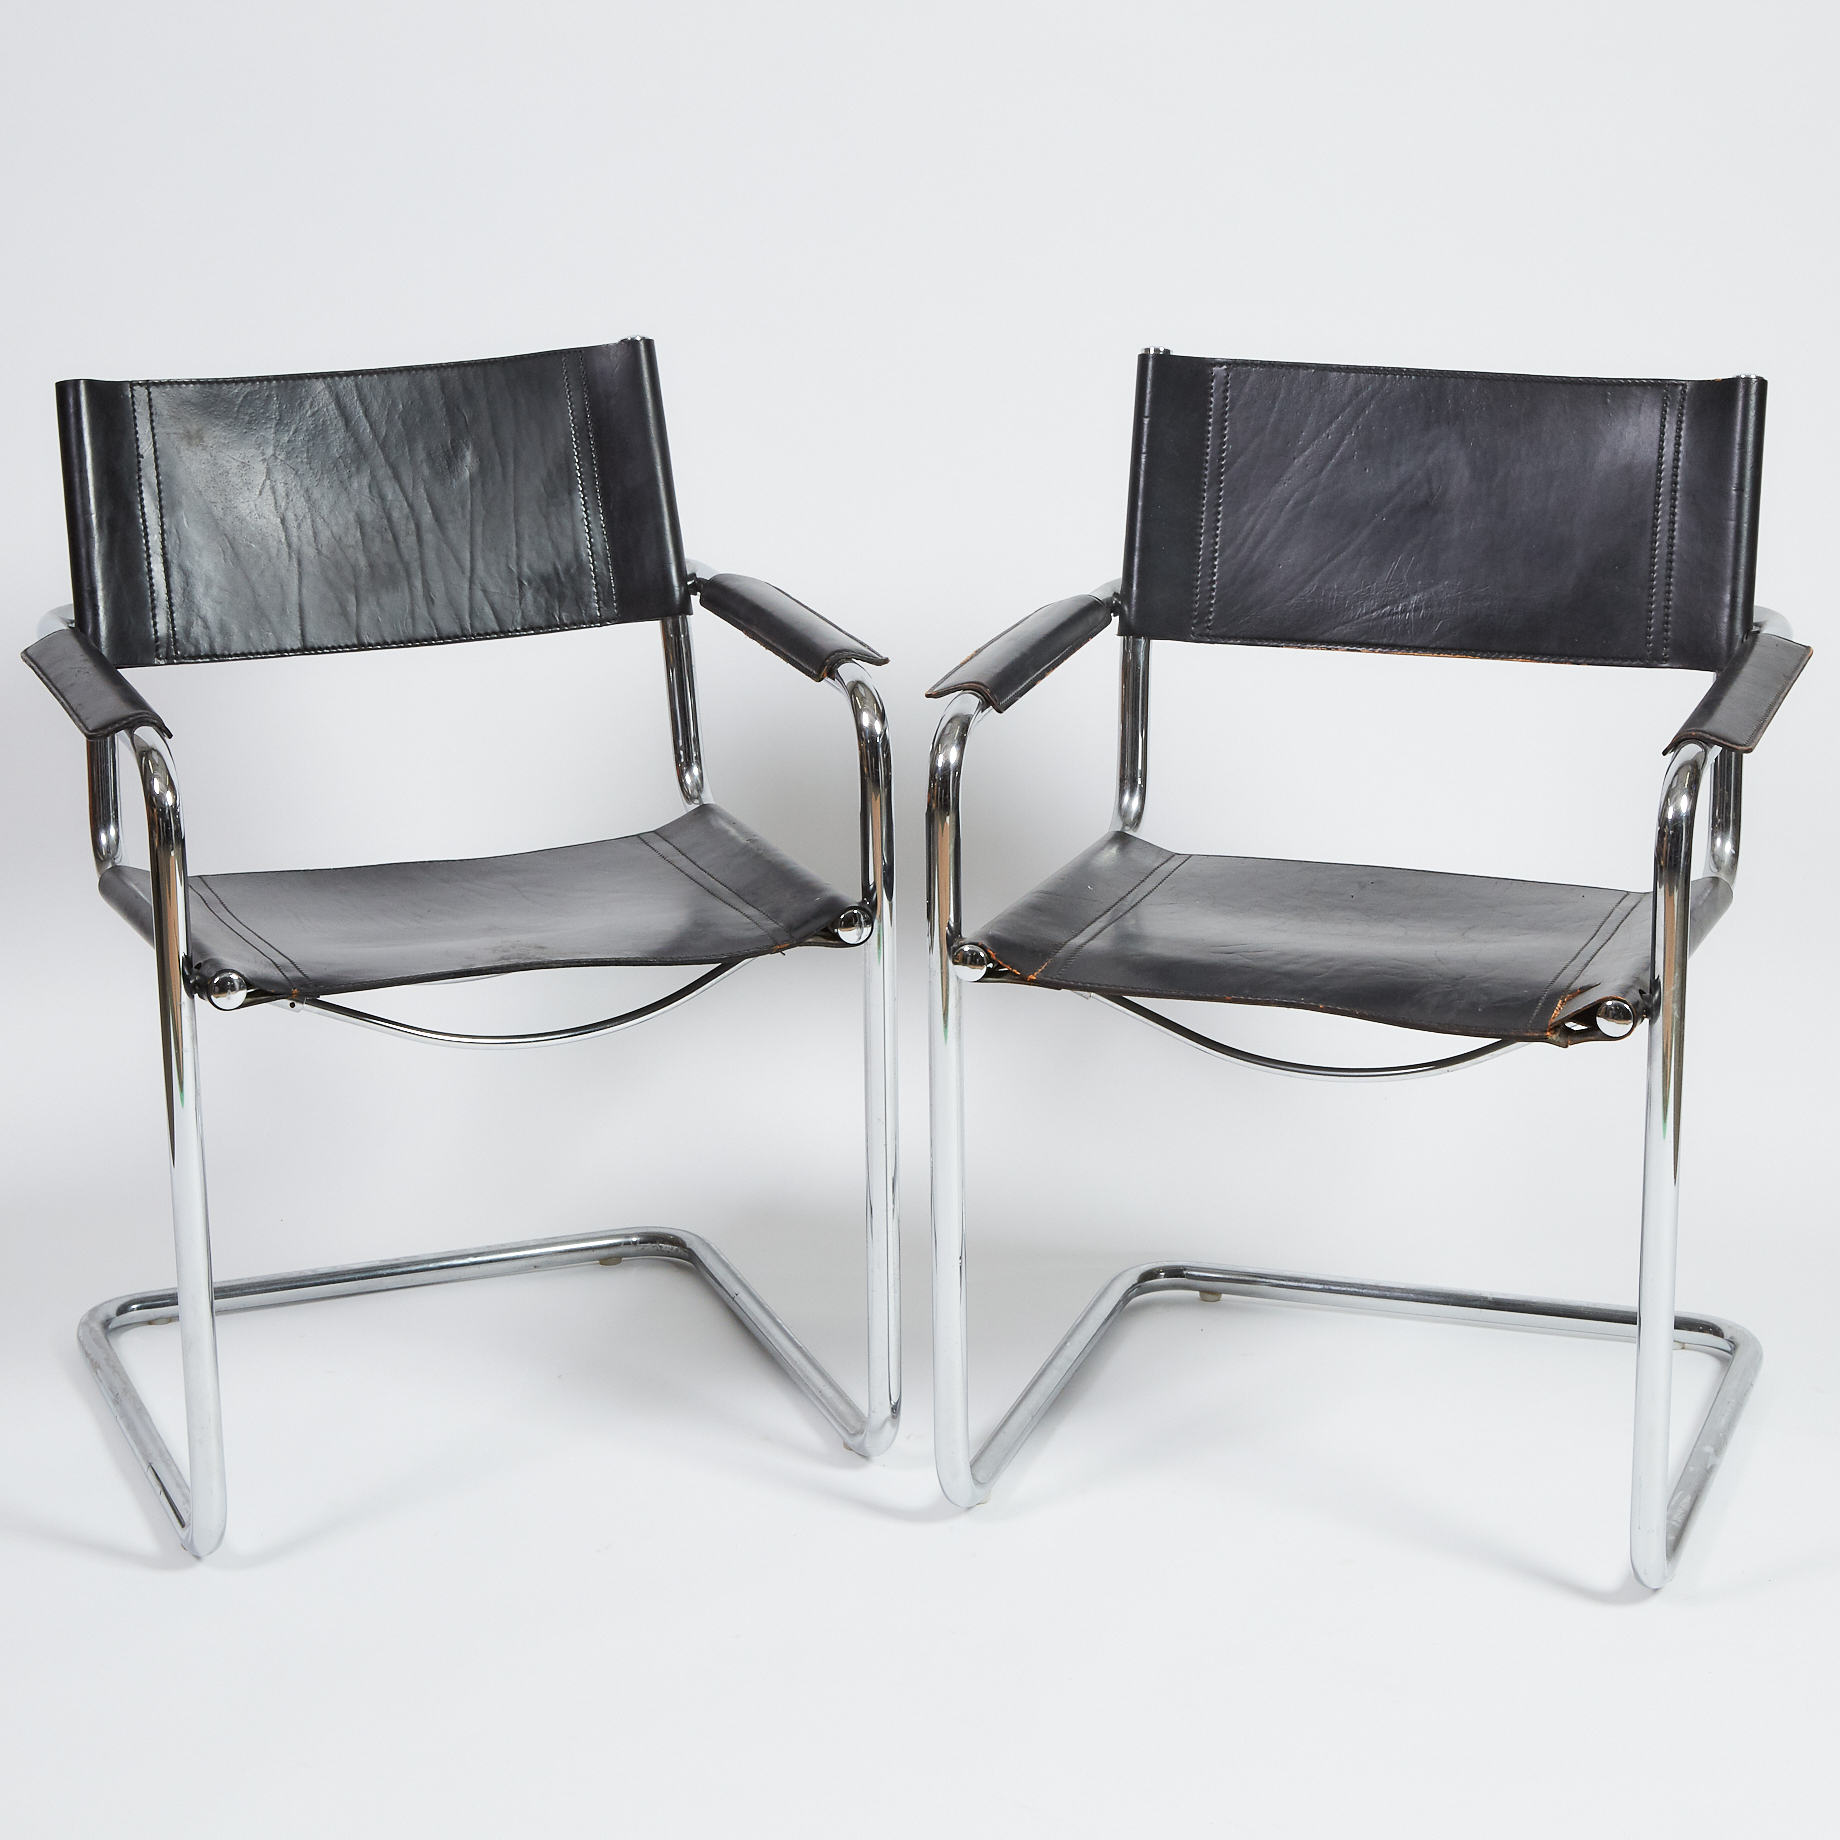 Pair of Contemporary Chrome and Leather Arm Chairs, c.1984